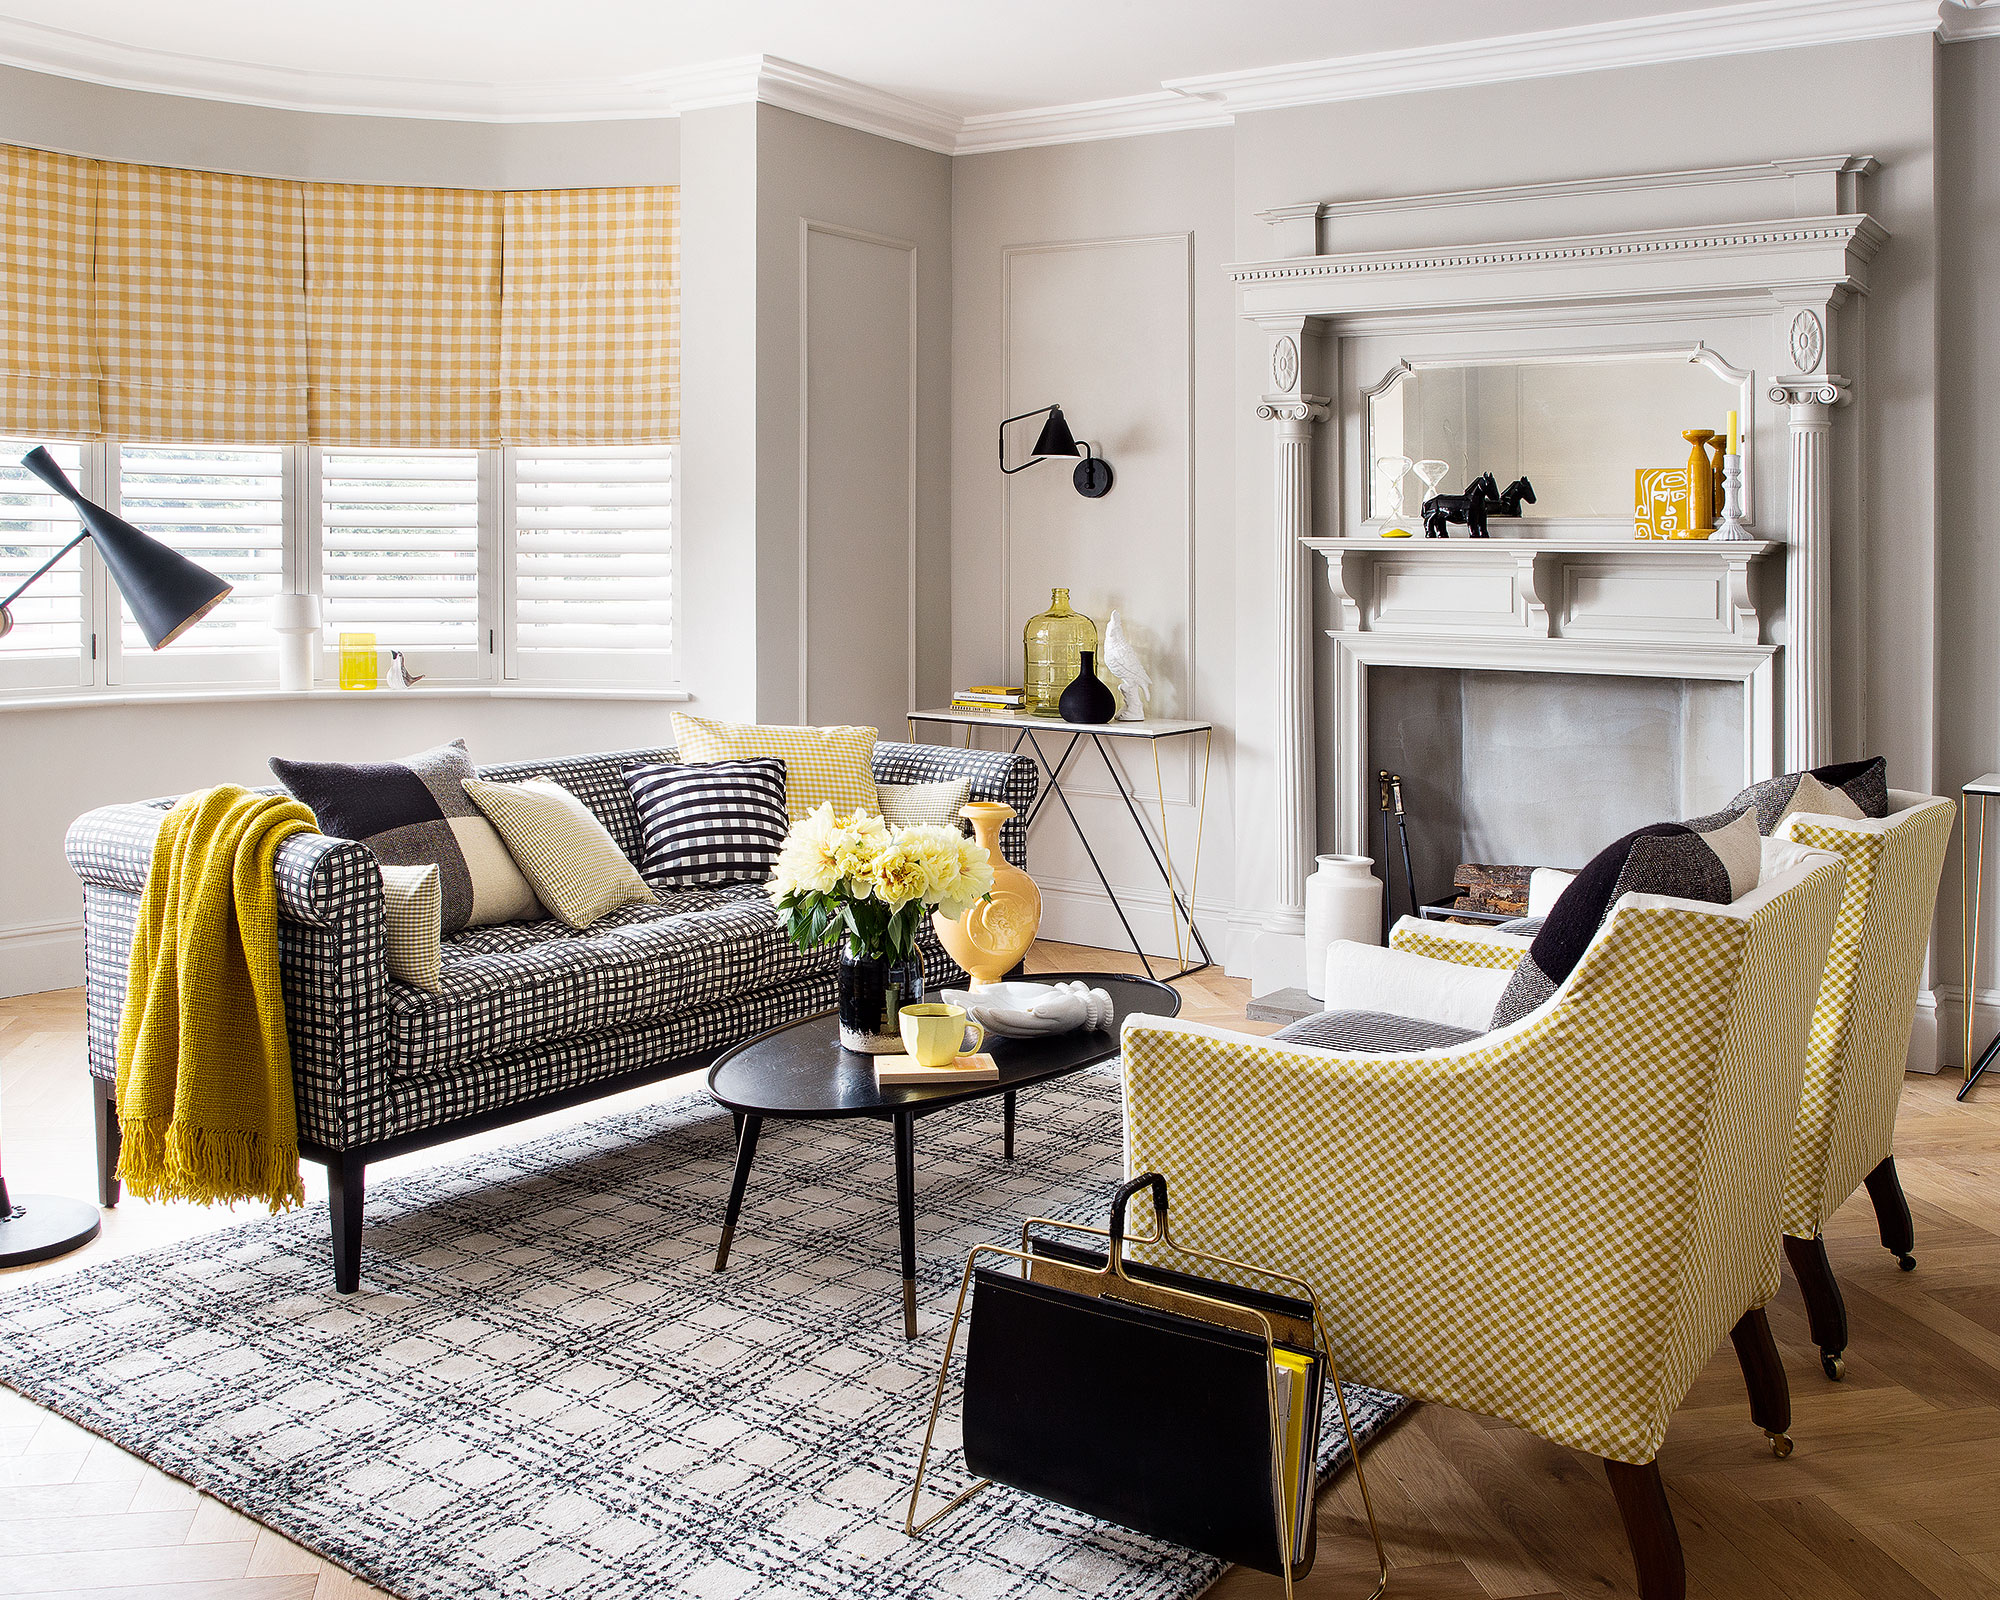 Living room in grey and yellow